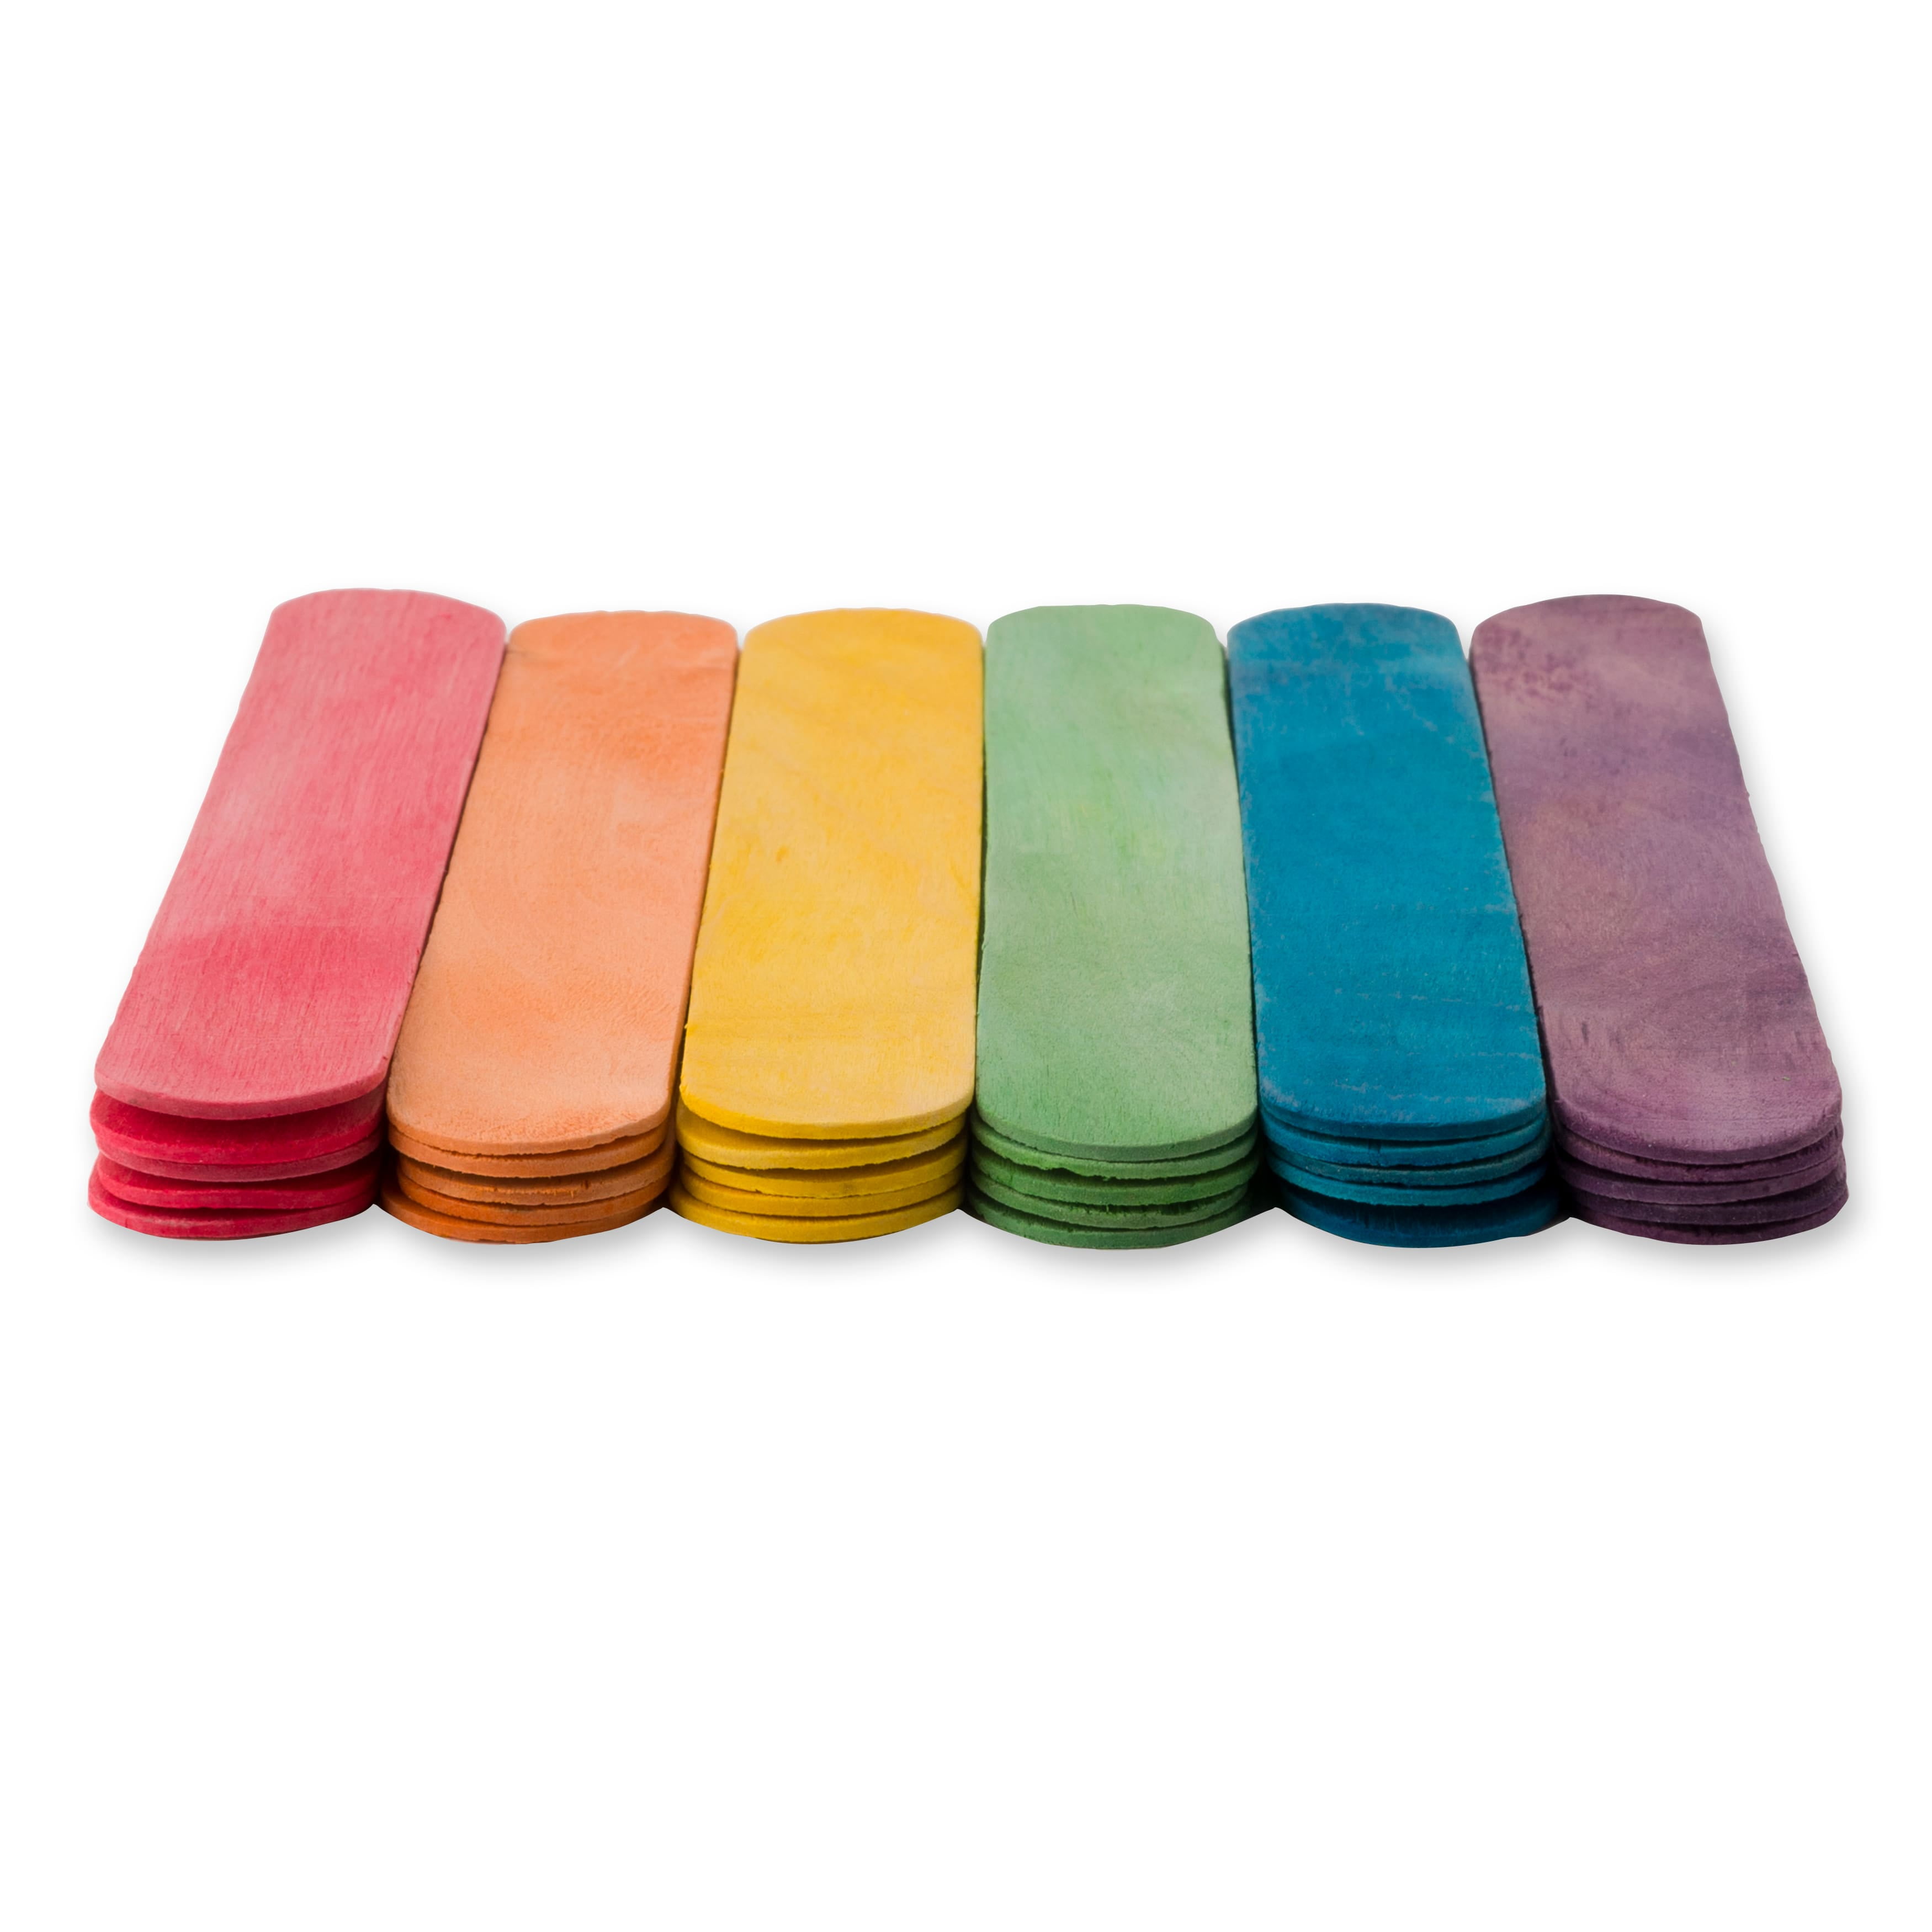 12 Packs: 30 ct. (360 total) Colorful Jumbo Craft Sticks by Creatology™ 